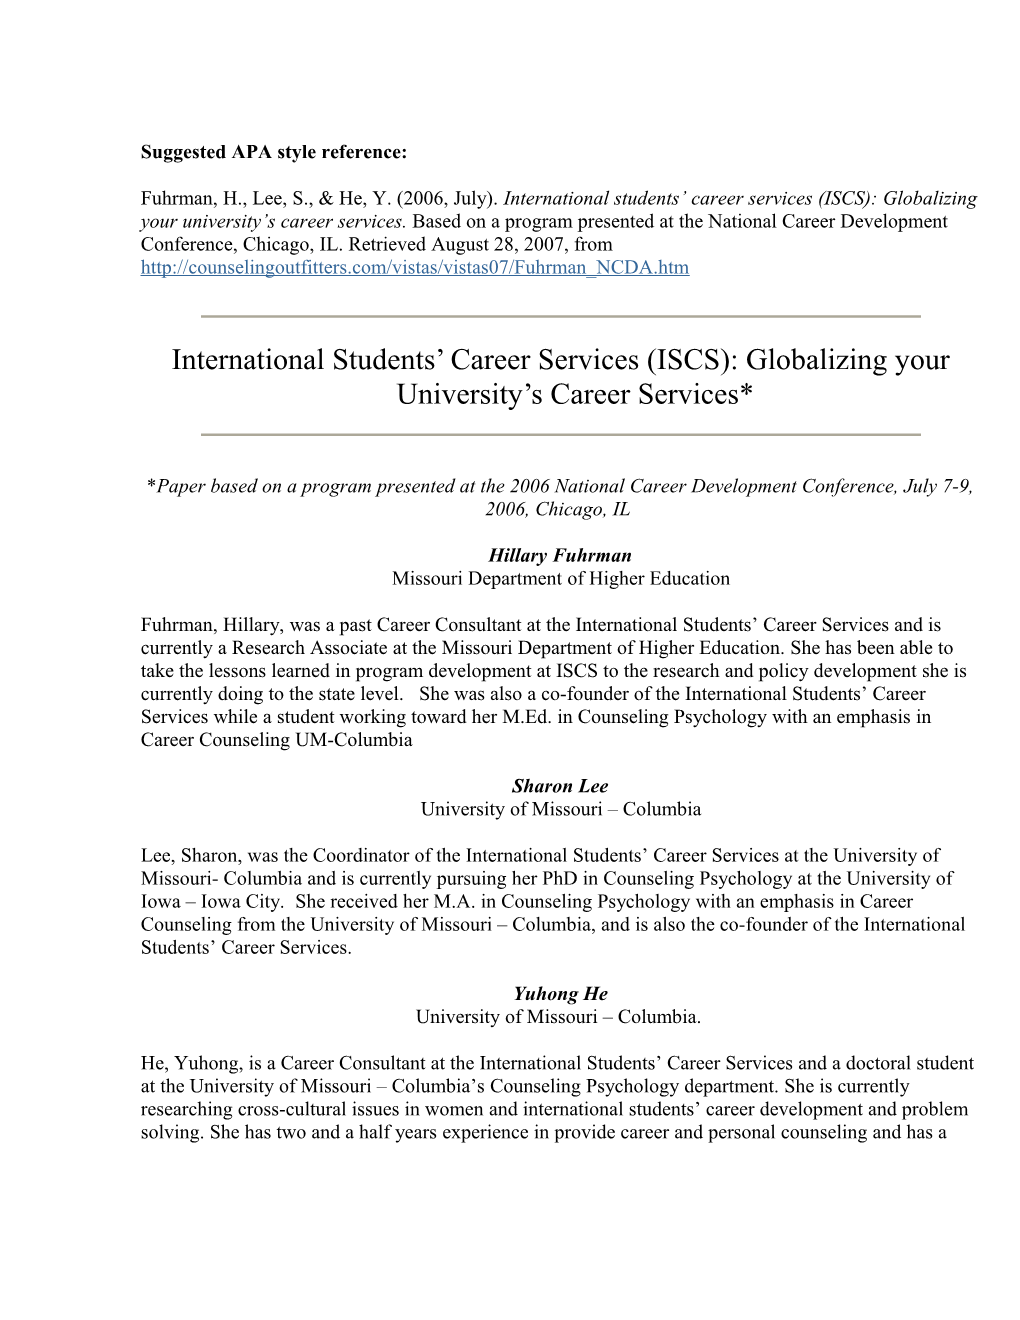 International Students Career Services (ISCS): Globalizing Your University S Career Services